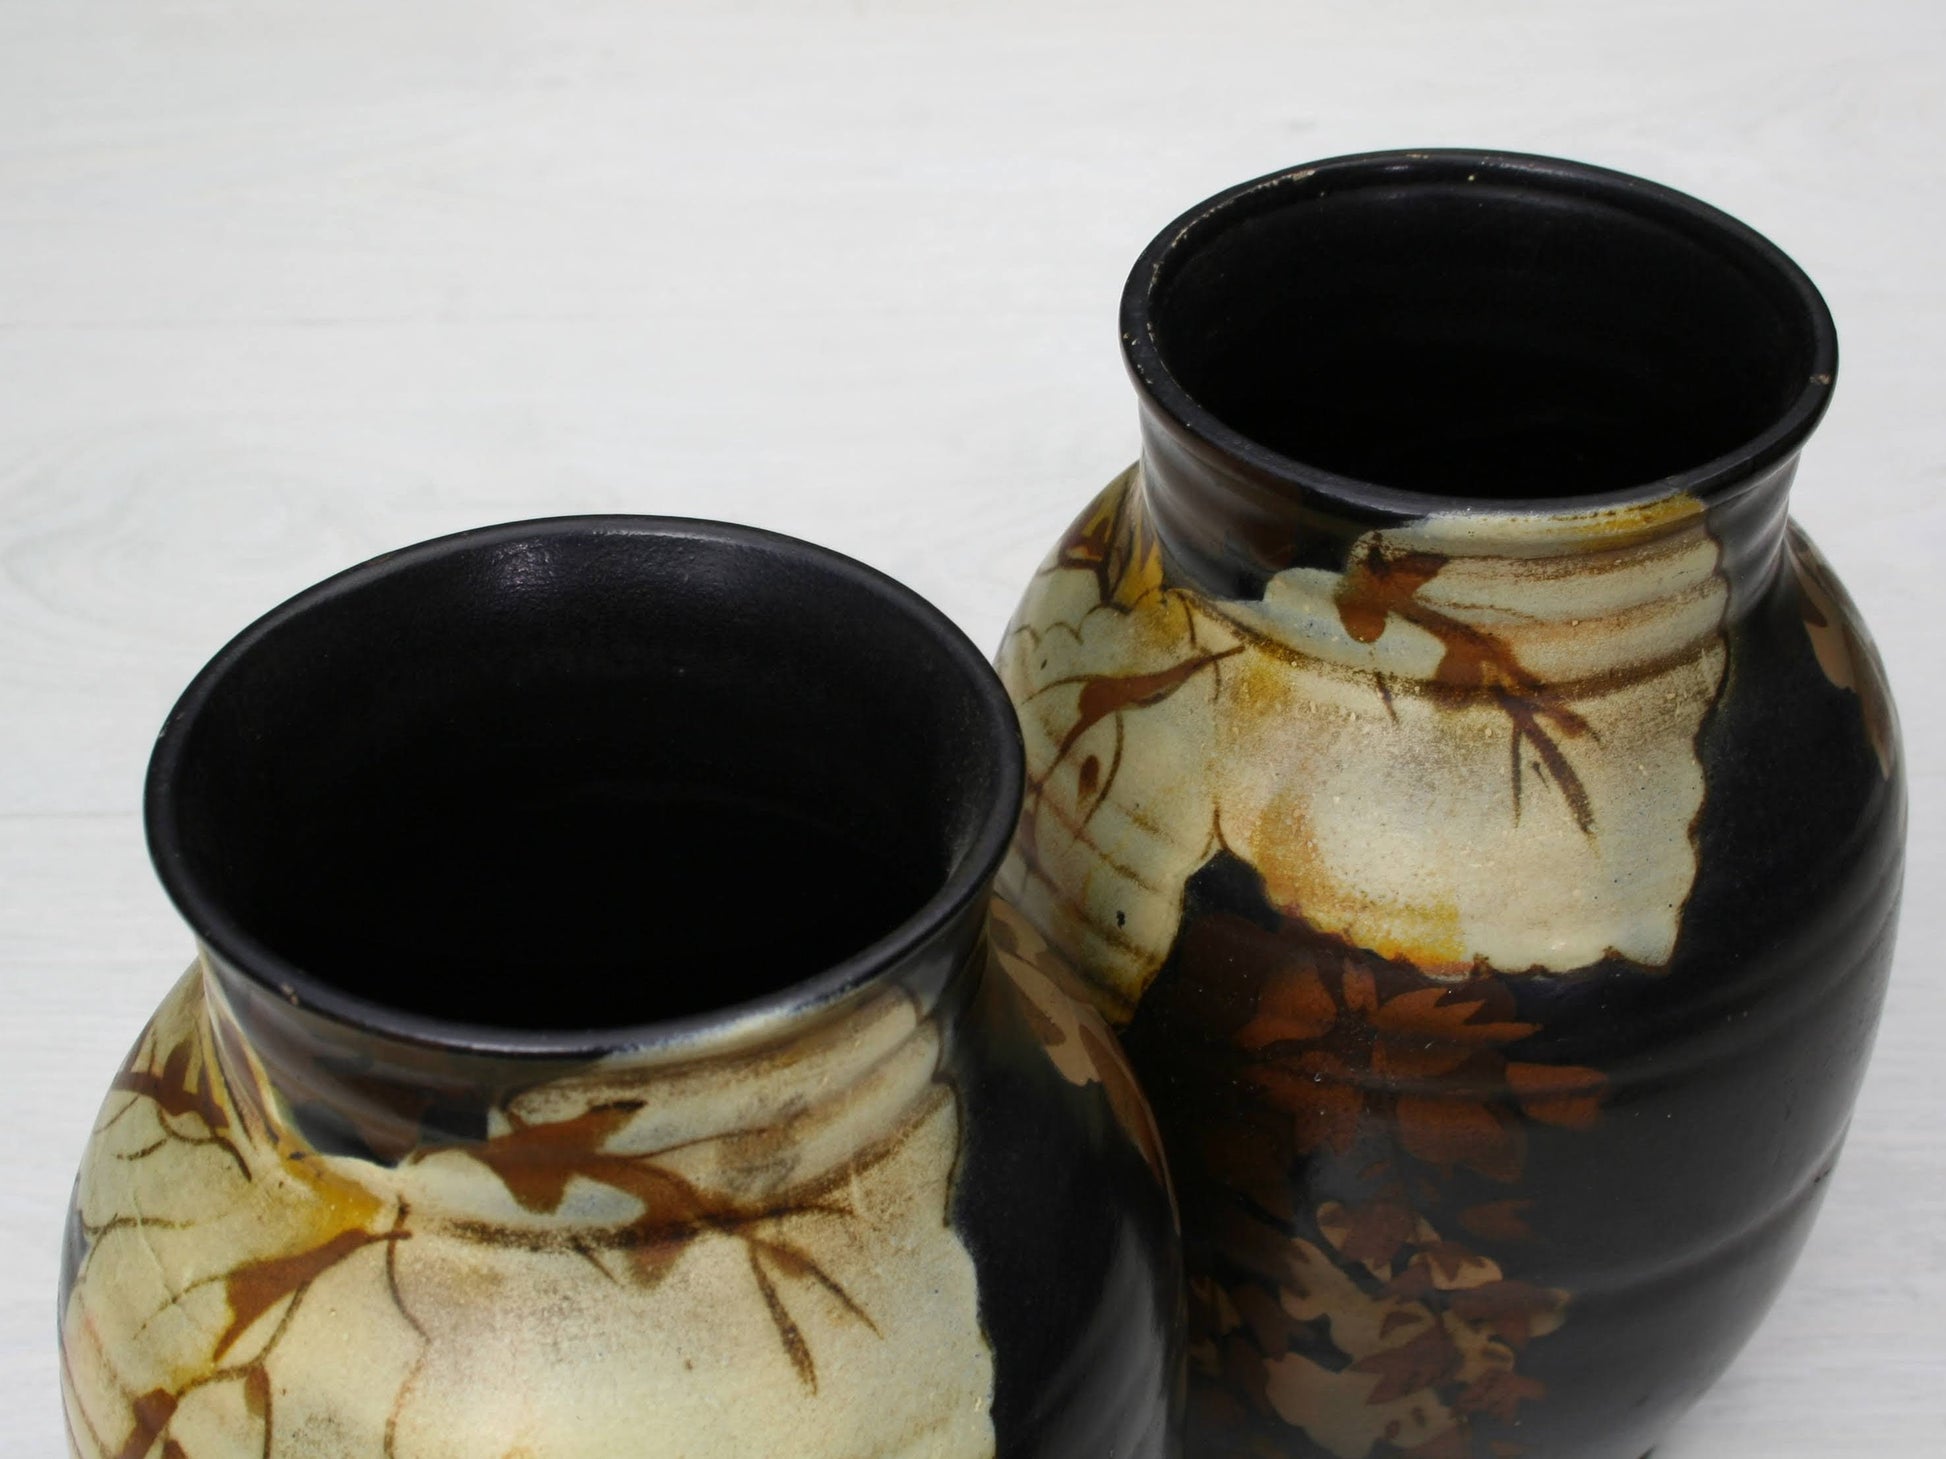 Made In England-Vase Set-Decorative Vases-Flower Vases-Unique Gift Ideas-Collectible Vases-Vintage Home Decor-Unique Flower Vase-Vintage